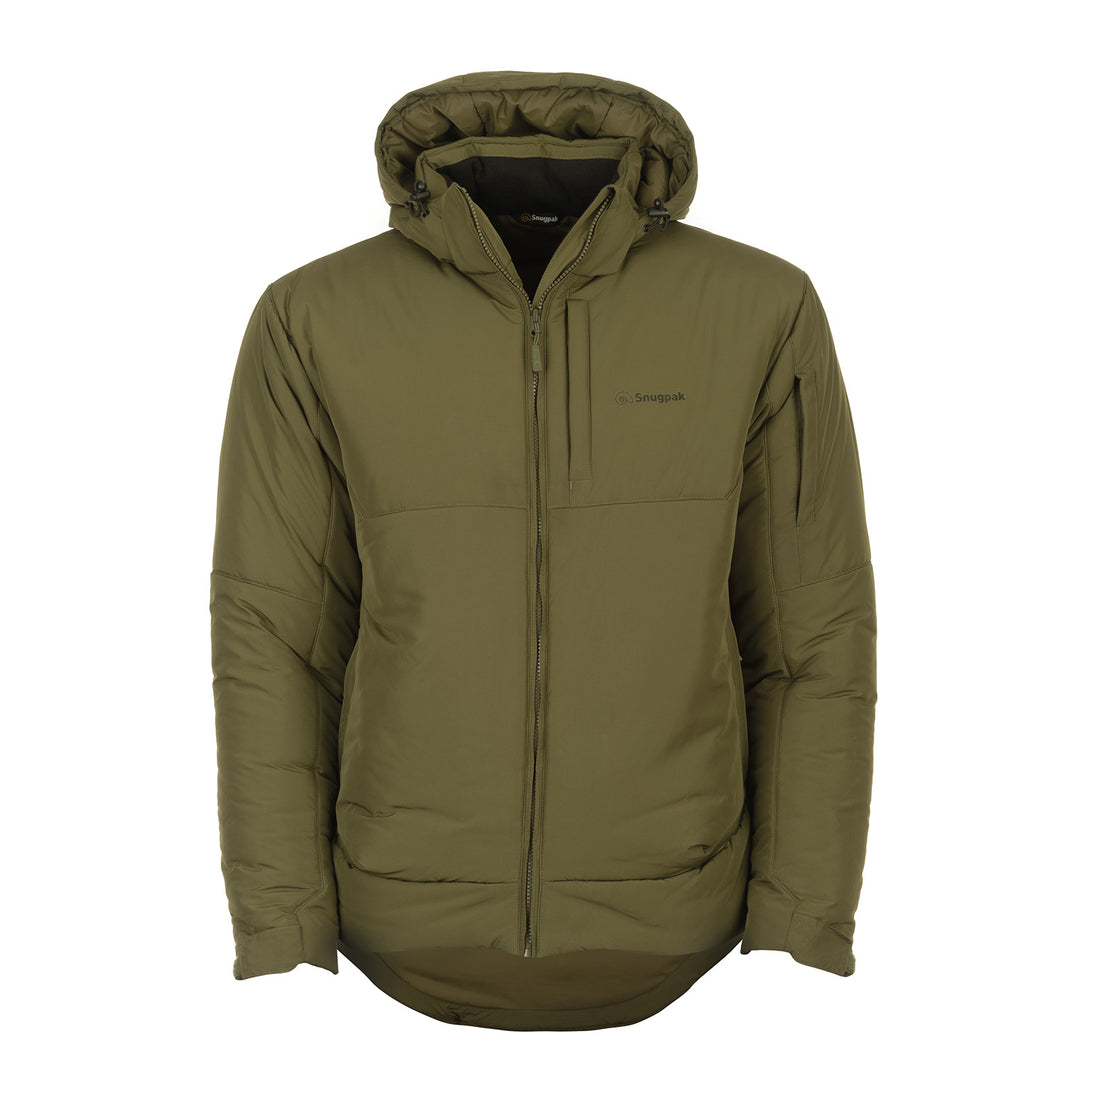 Snugpak Tomahawk Cold Weather Insulated Jacket